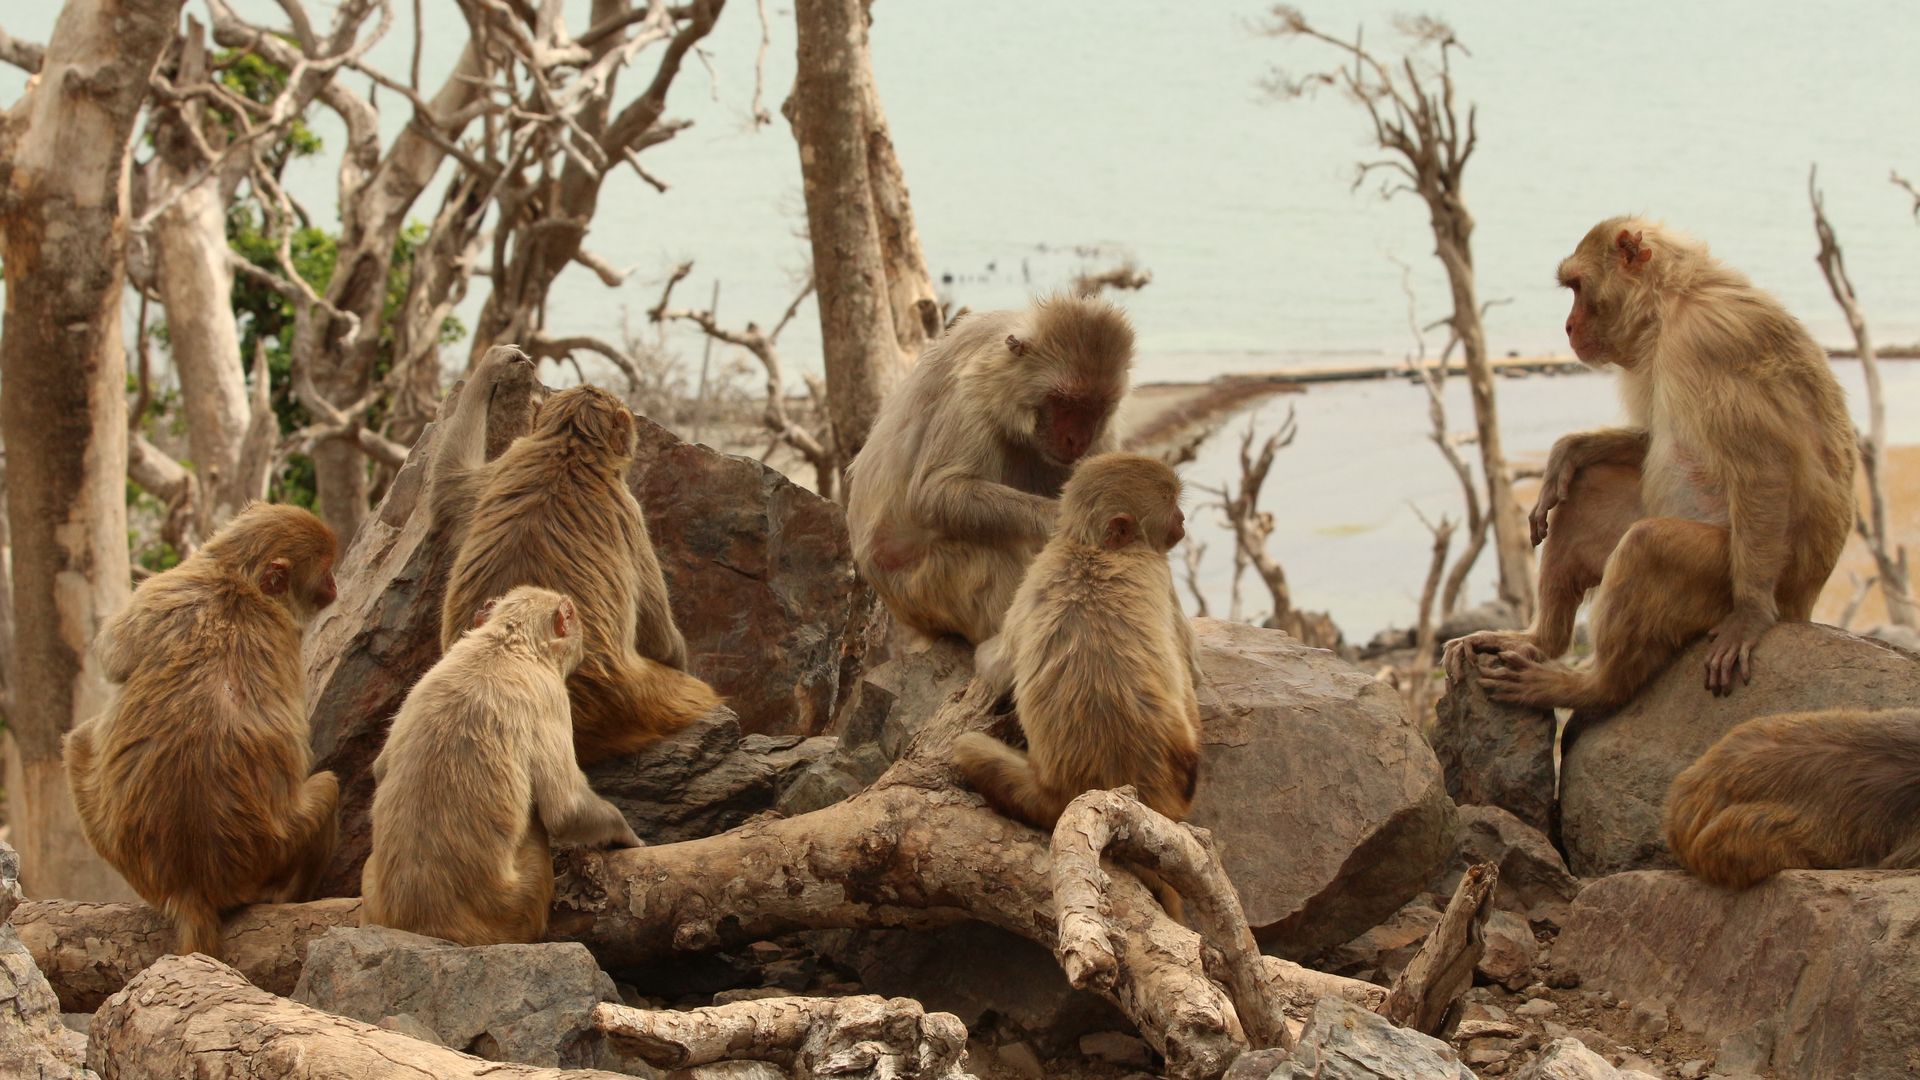 Group of macaques sitting together and grooming, with bare landscape in the background. 